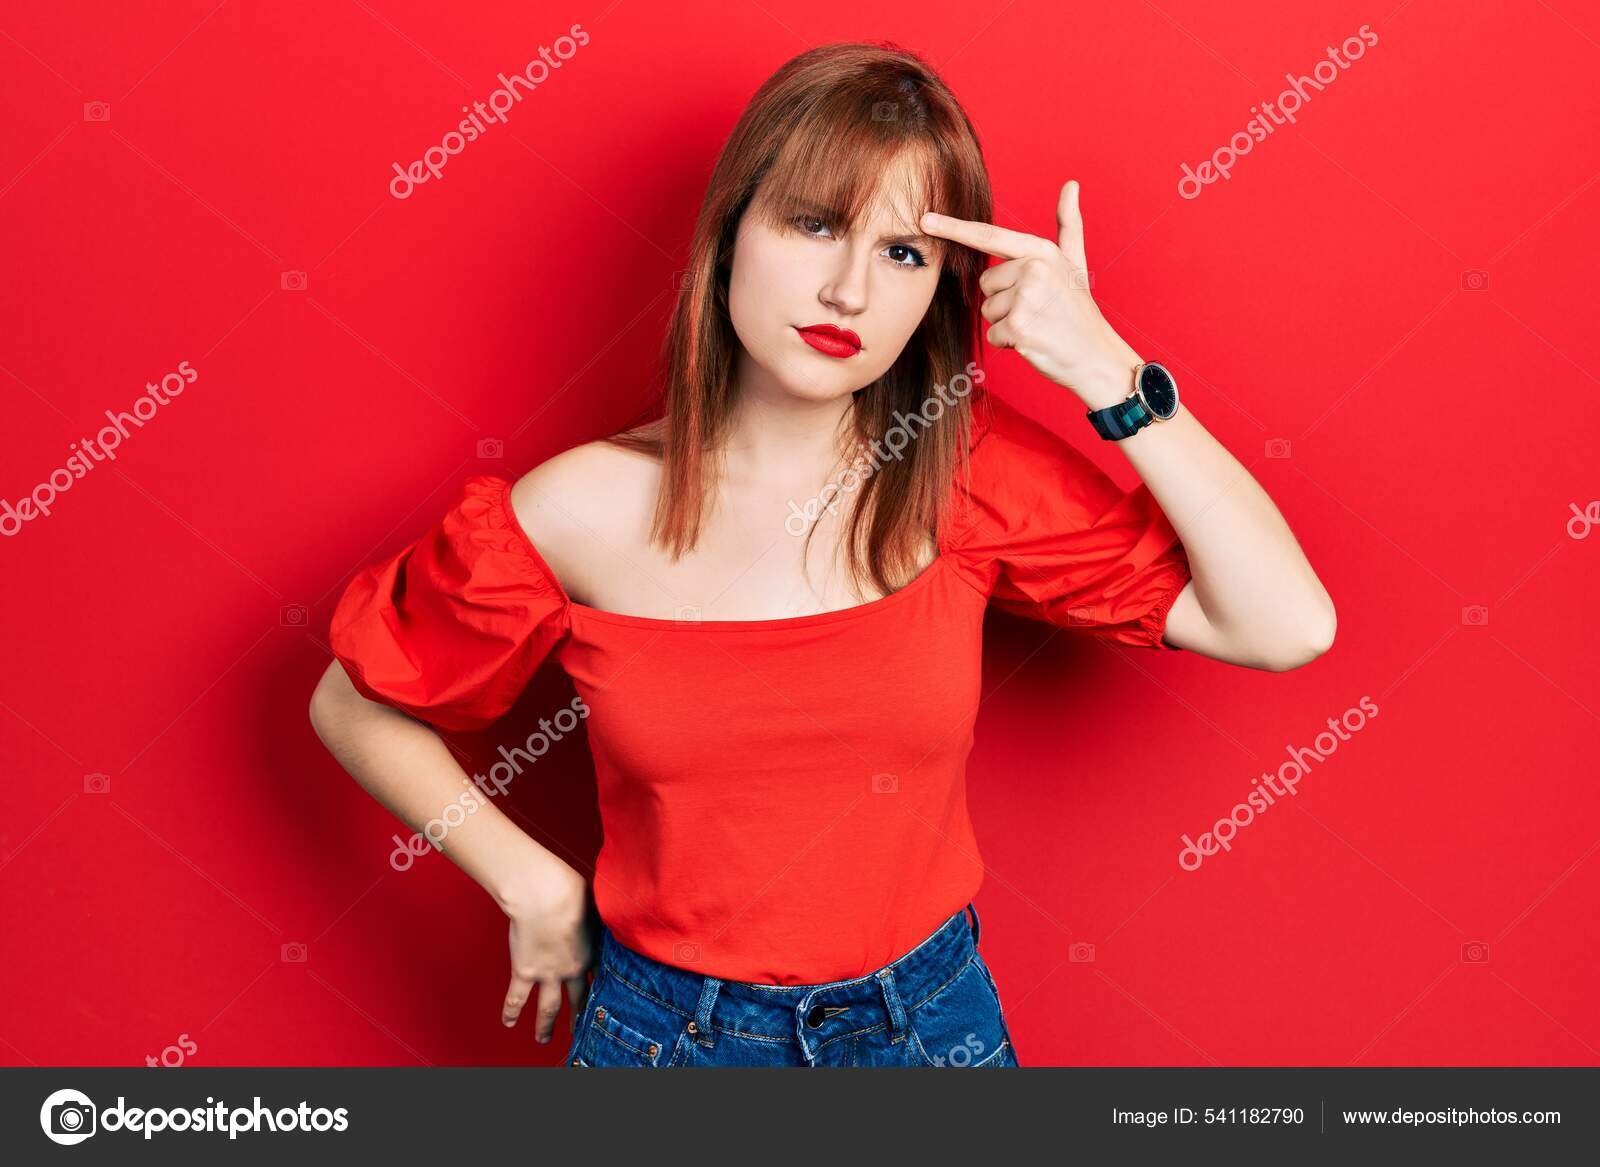 Redhead Young Woman Wearing Casual Red Shirt Pointing Unhappy